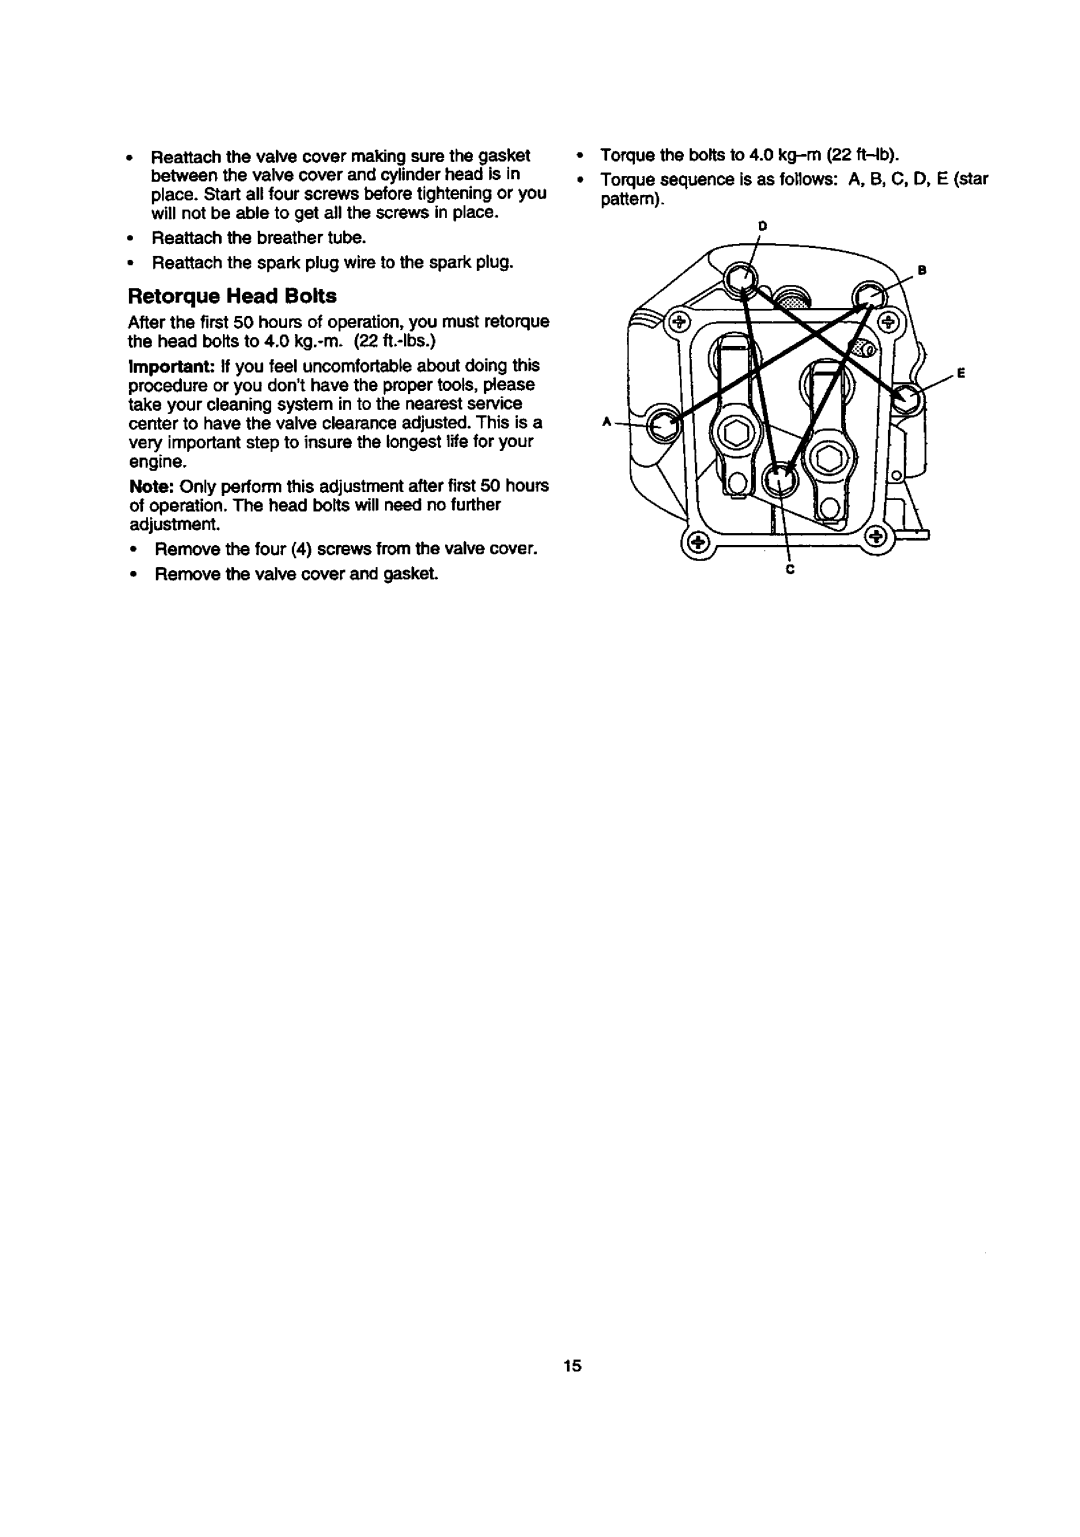 Sears 580.768050 manual Reattach the breather tube 